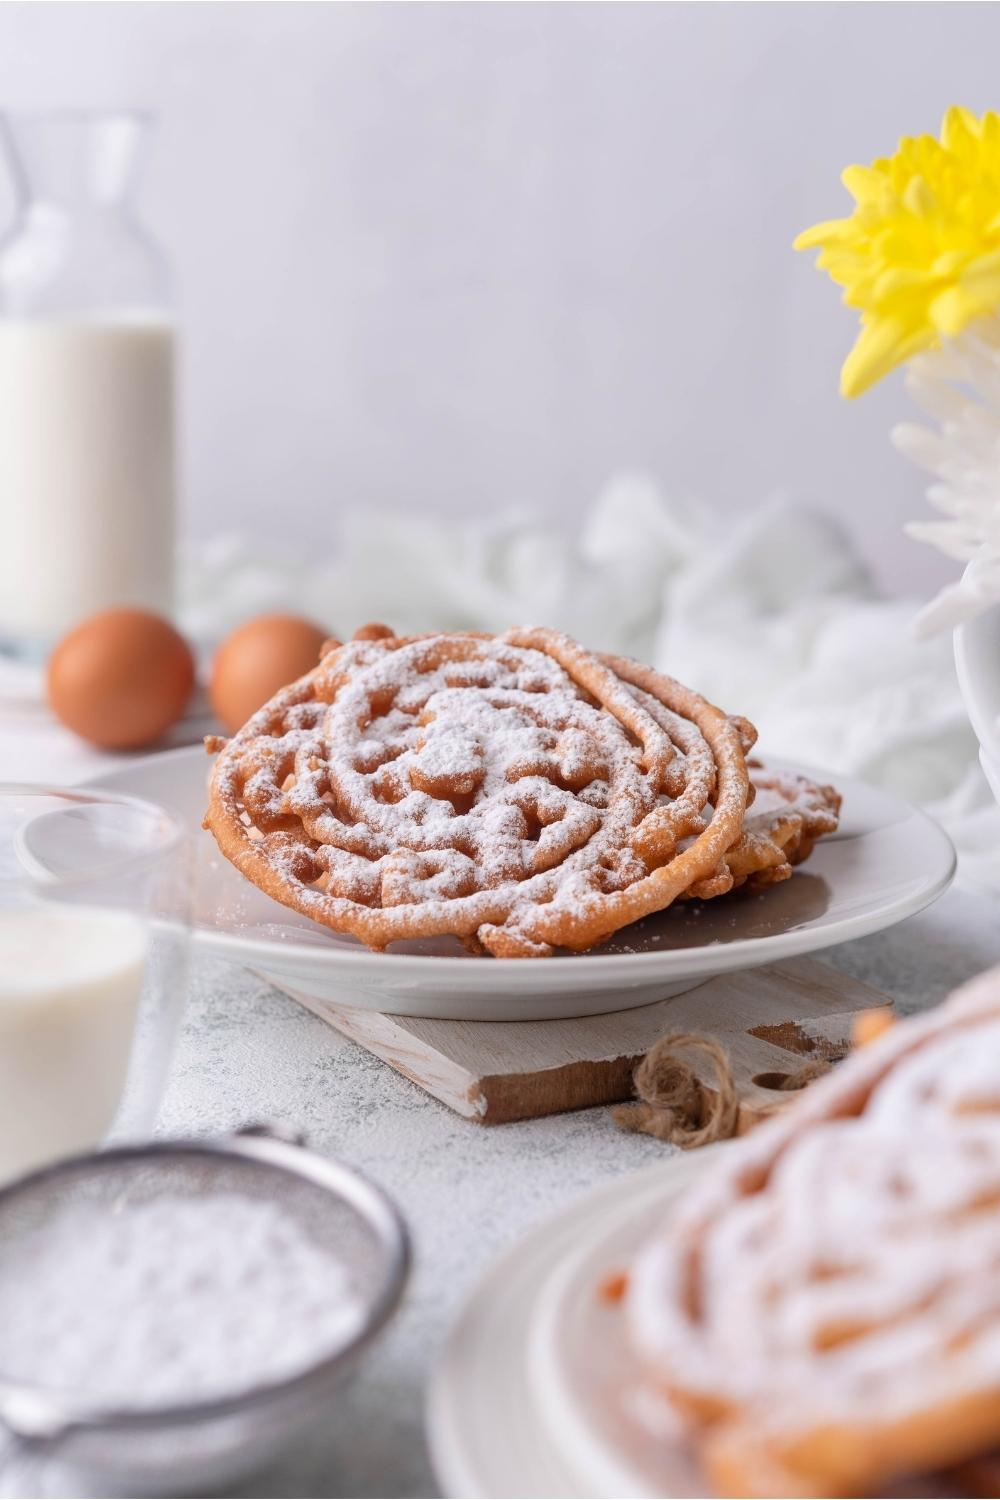 A plate of funnel cakes covered in powdered sugar, with ingredients surrounding the plate.